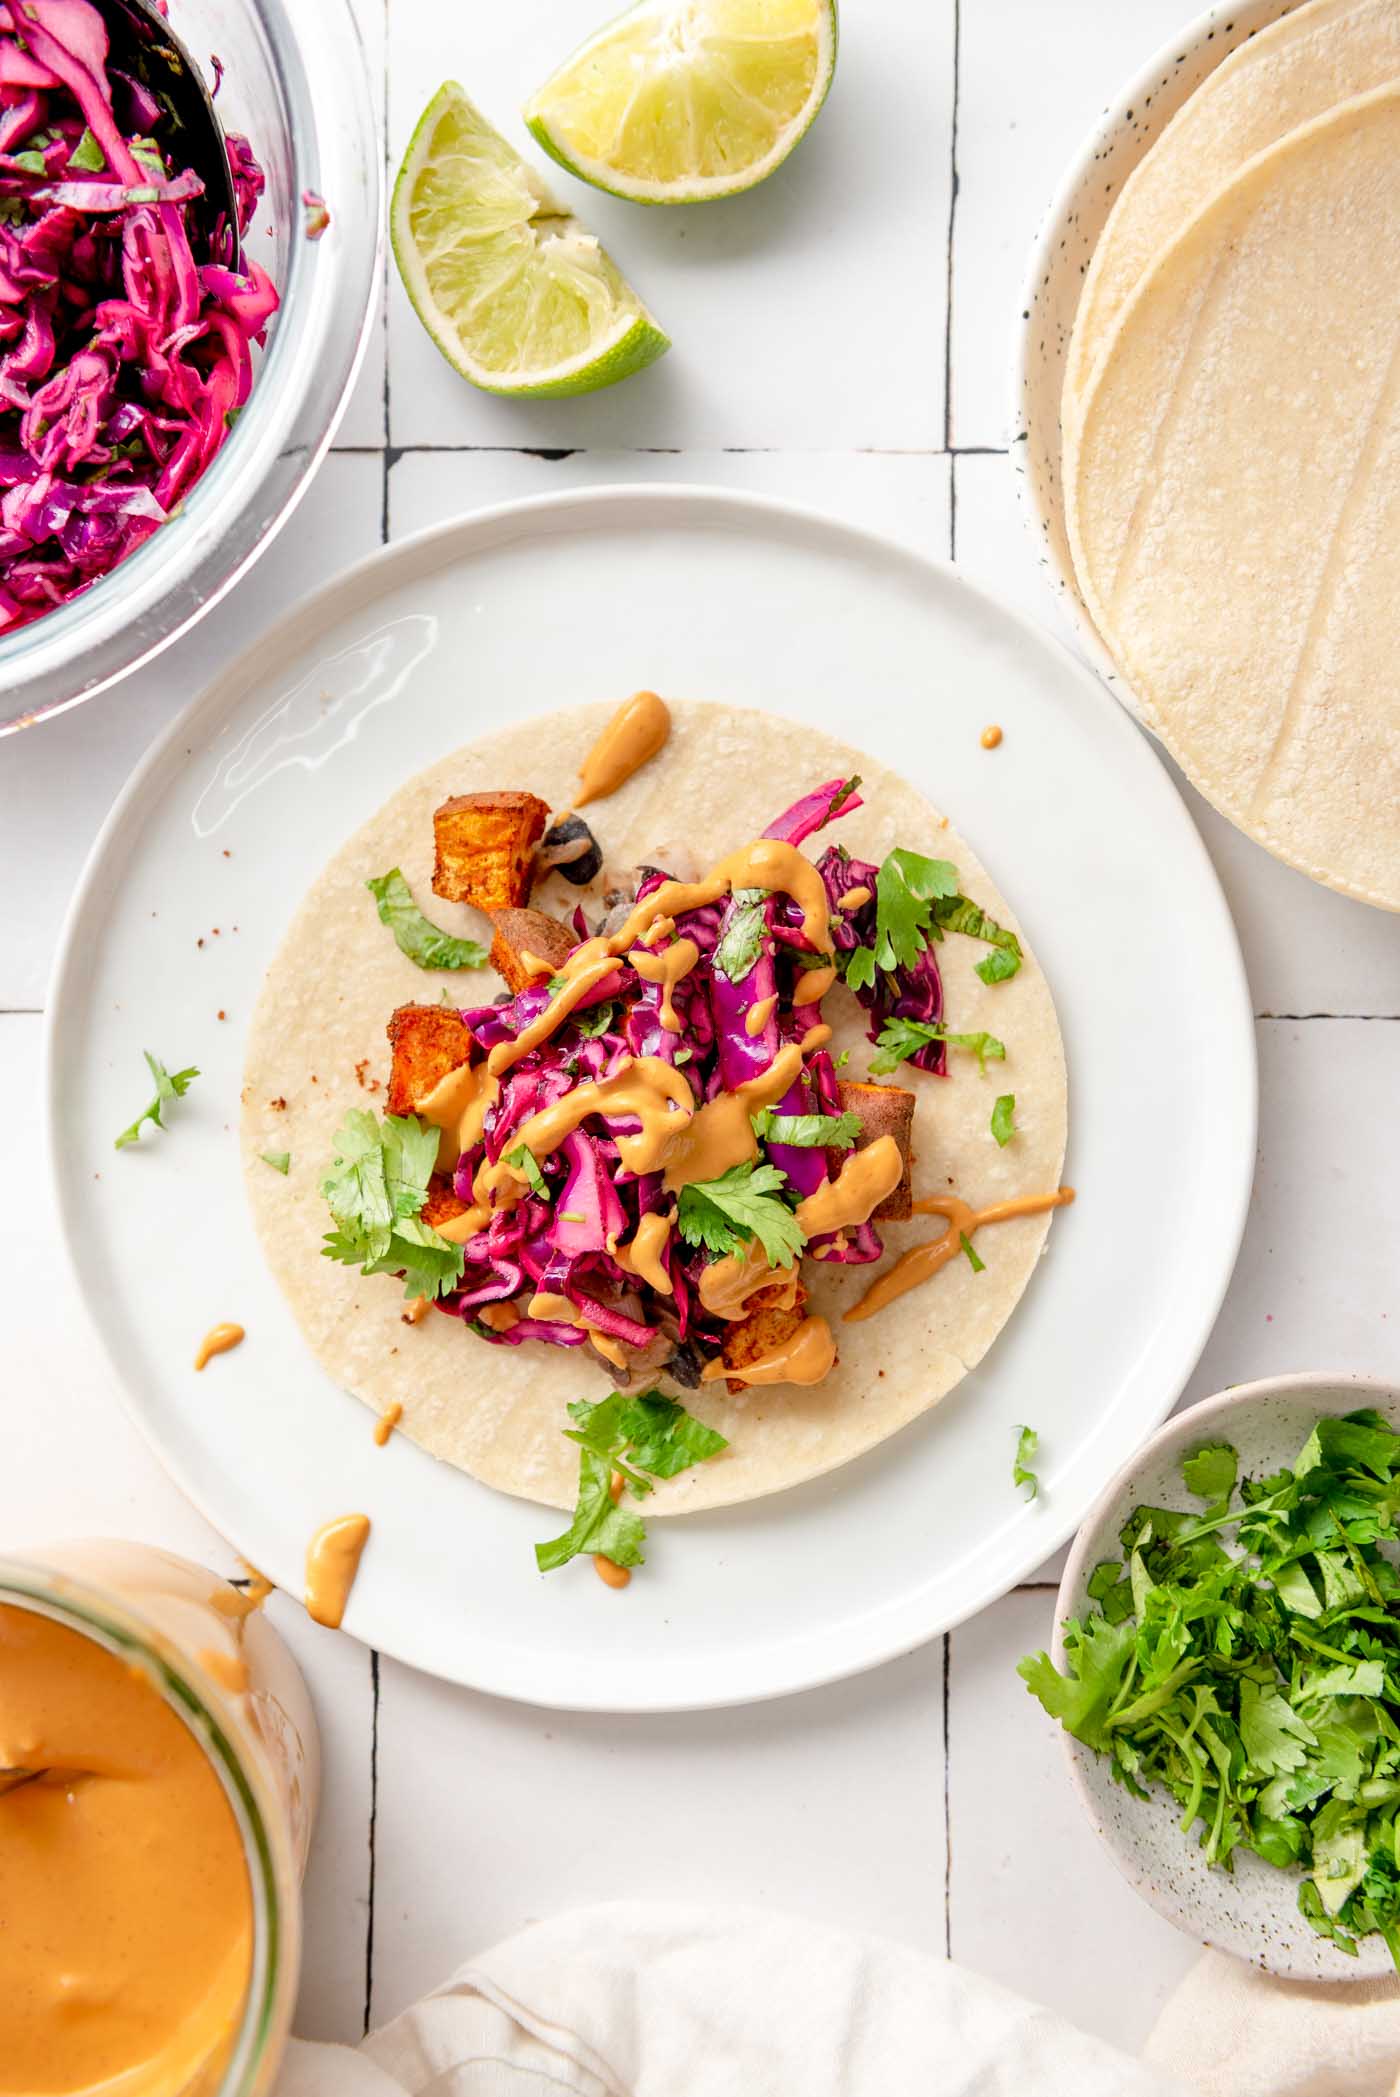 A sweet potato and black bean taco topped with red cabbage slaw and a creamy sauce on a plate. There is a plate of tortillas beside the plate and bowls of cilantro, cabbage slaw and the sauce.